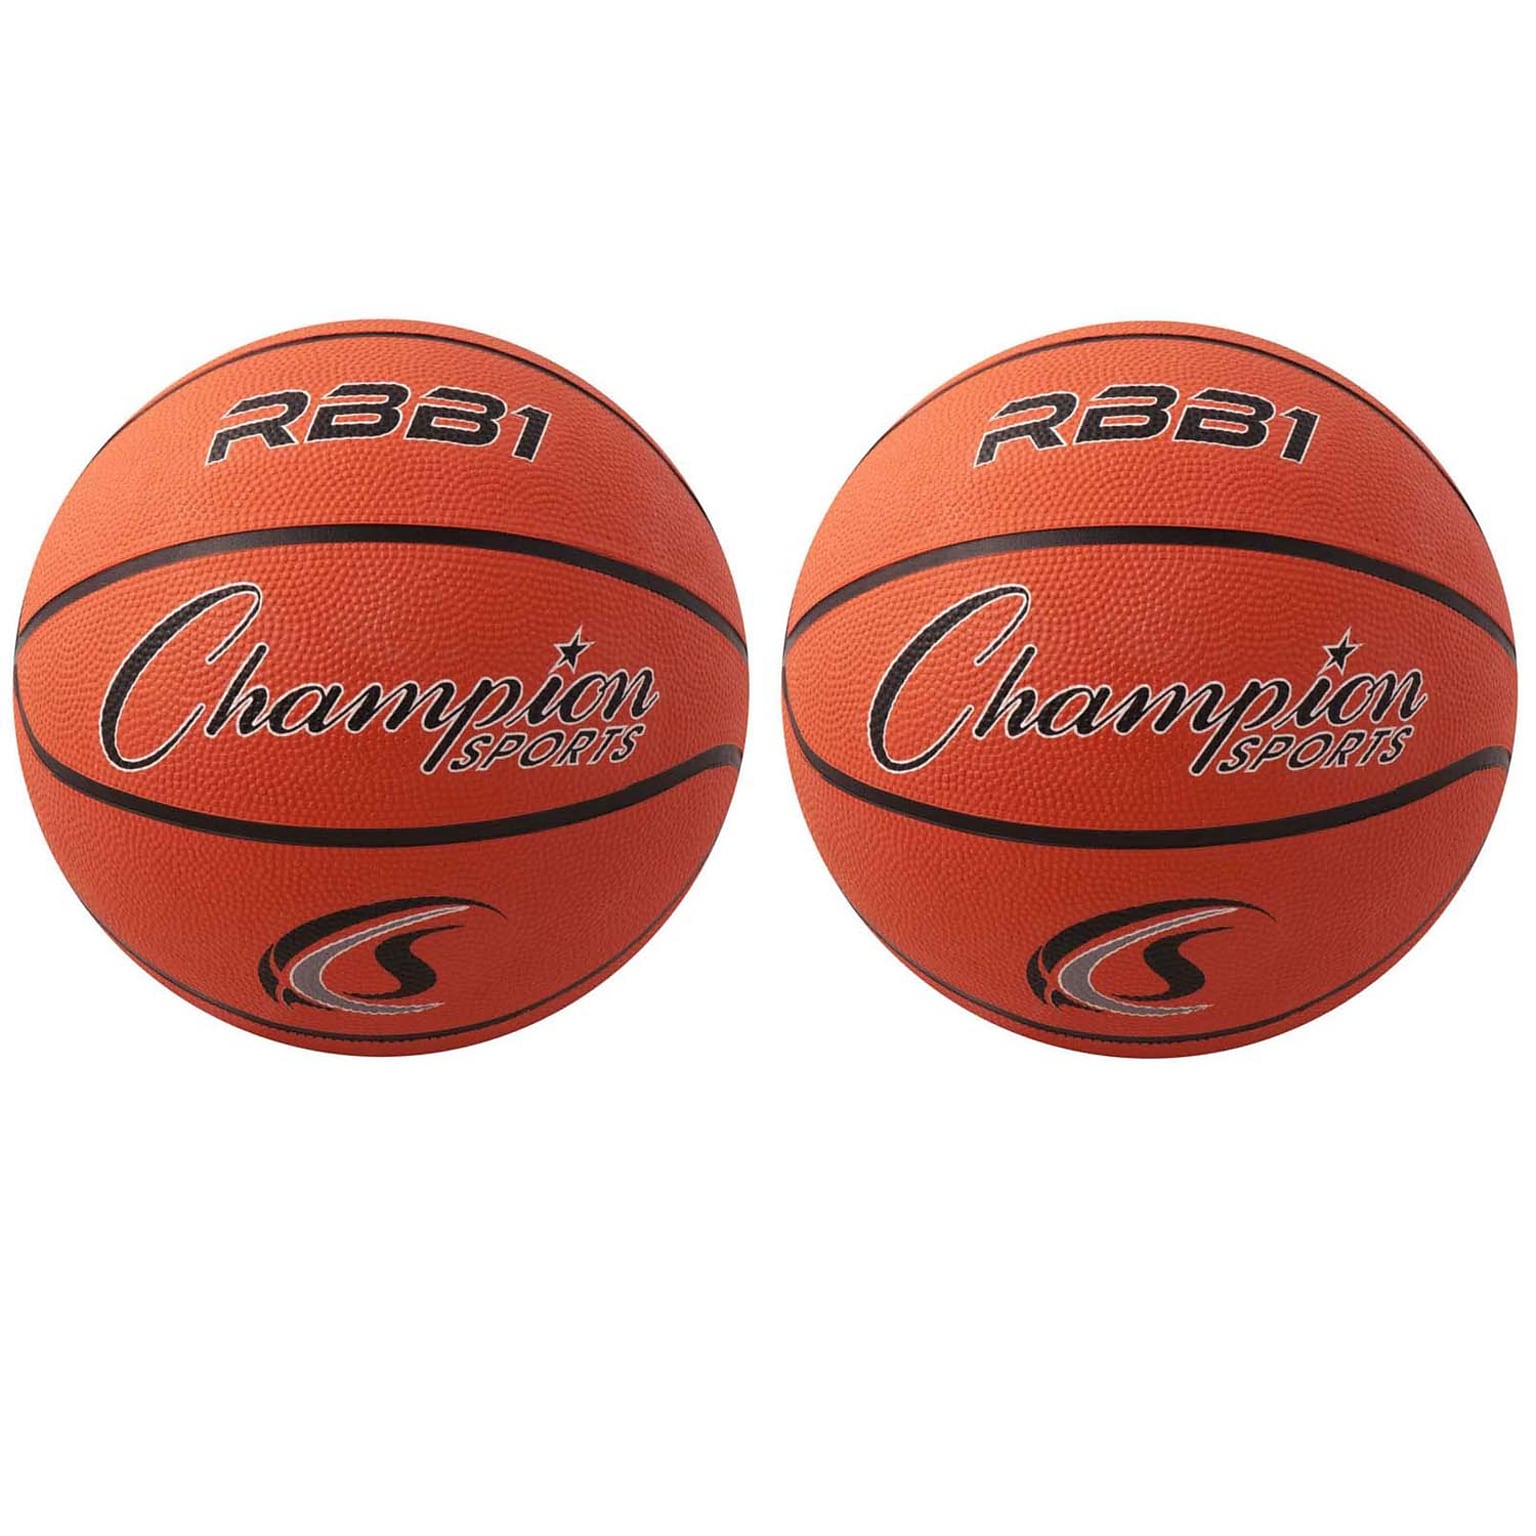 Champion Sports Official Size Rubber Basketball, Orange/Black, Pack of 2 (CHSRBB1-2)